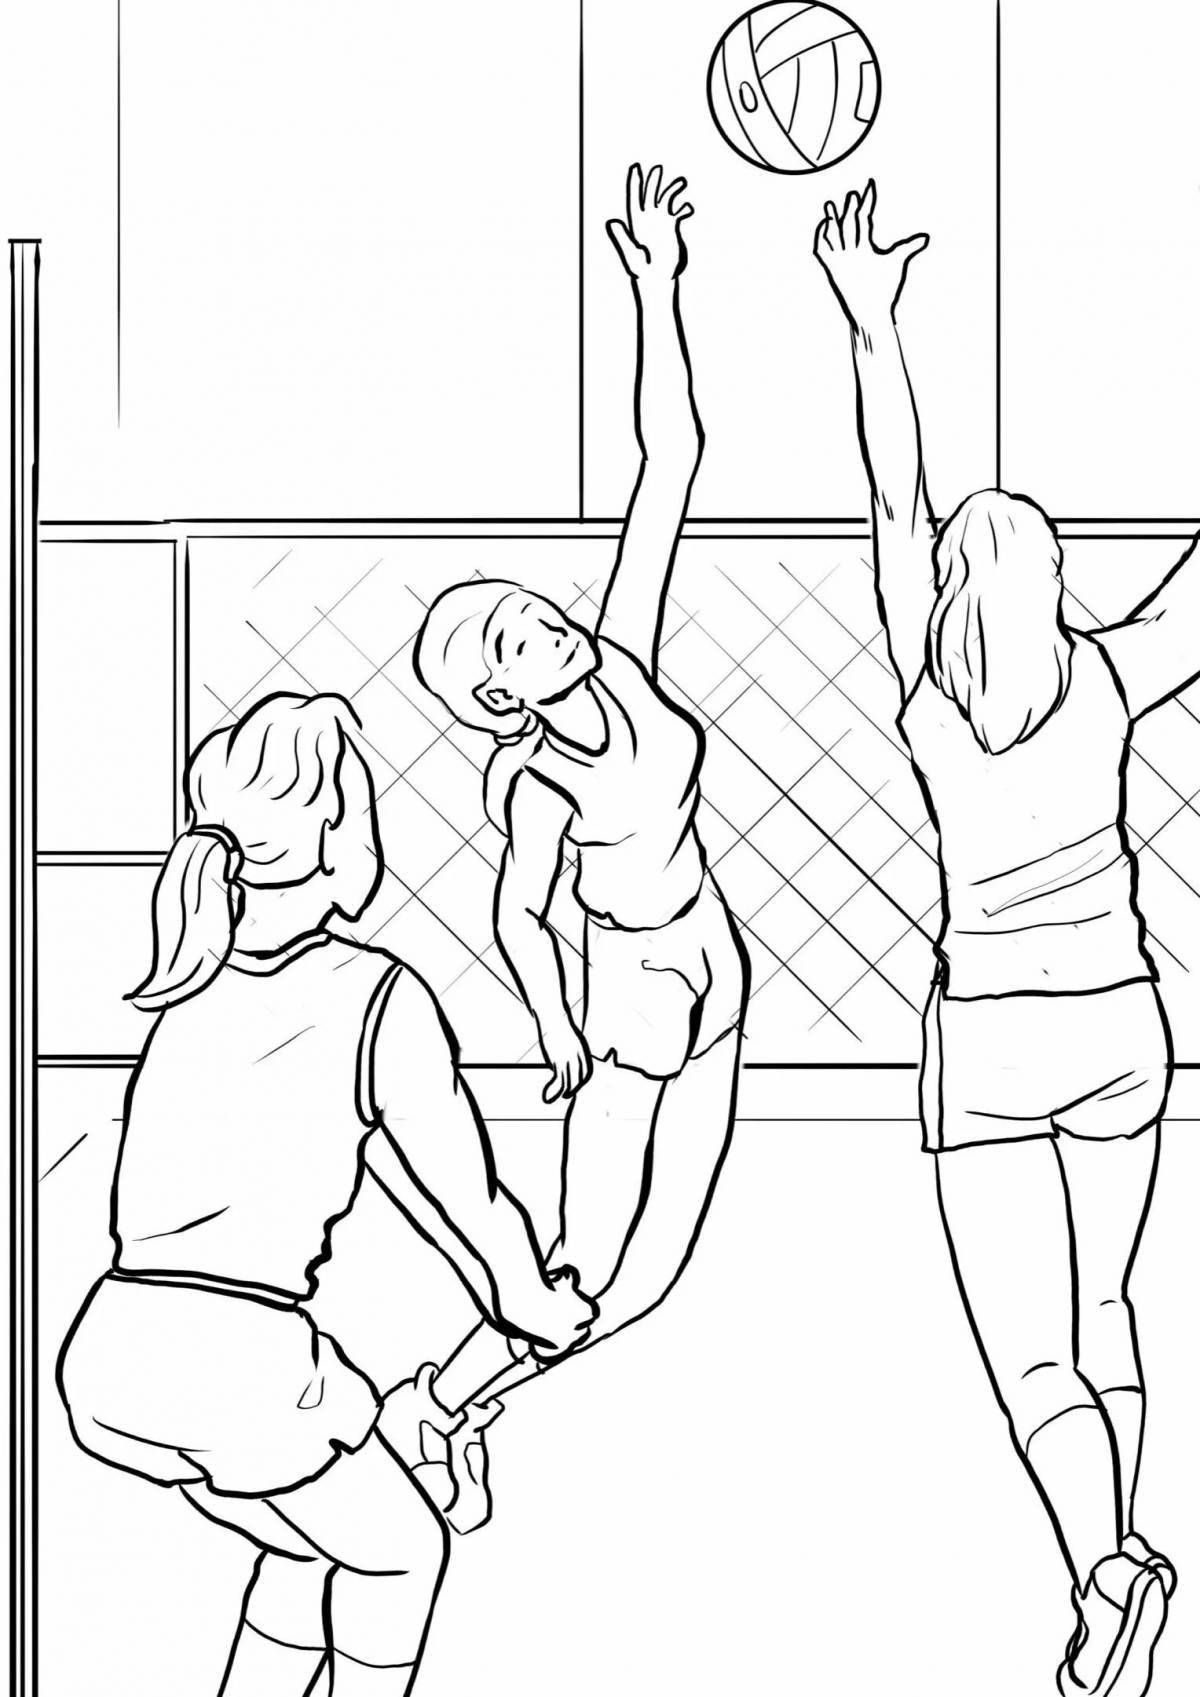 Colorful volleyball coloring book for elementary school children